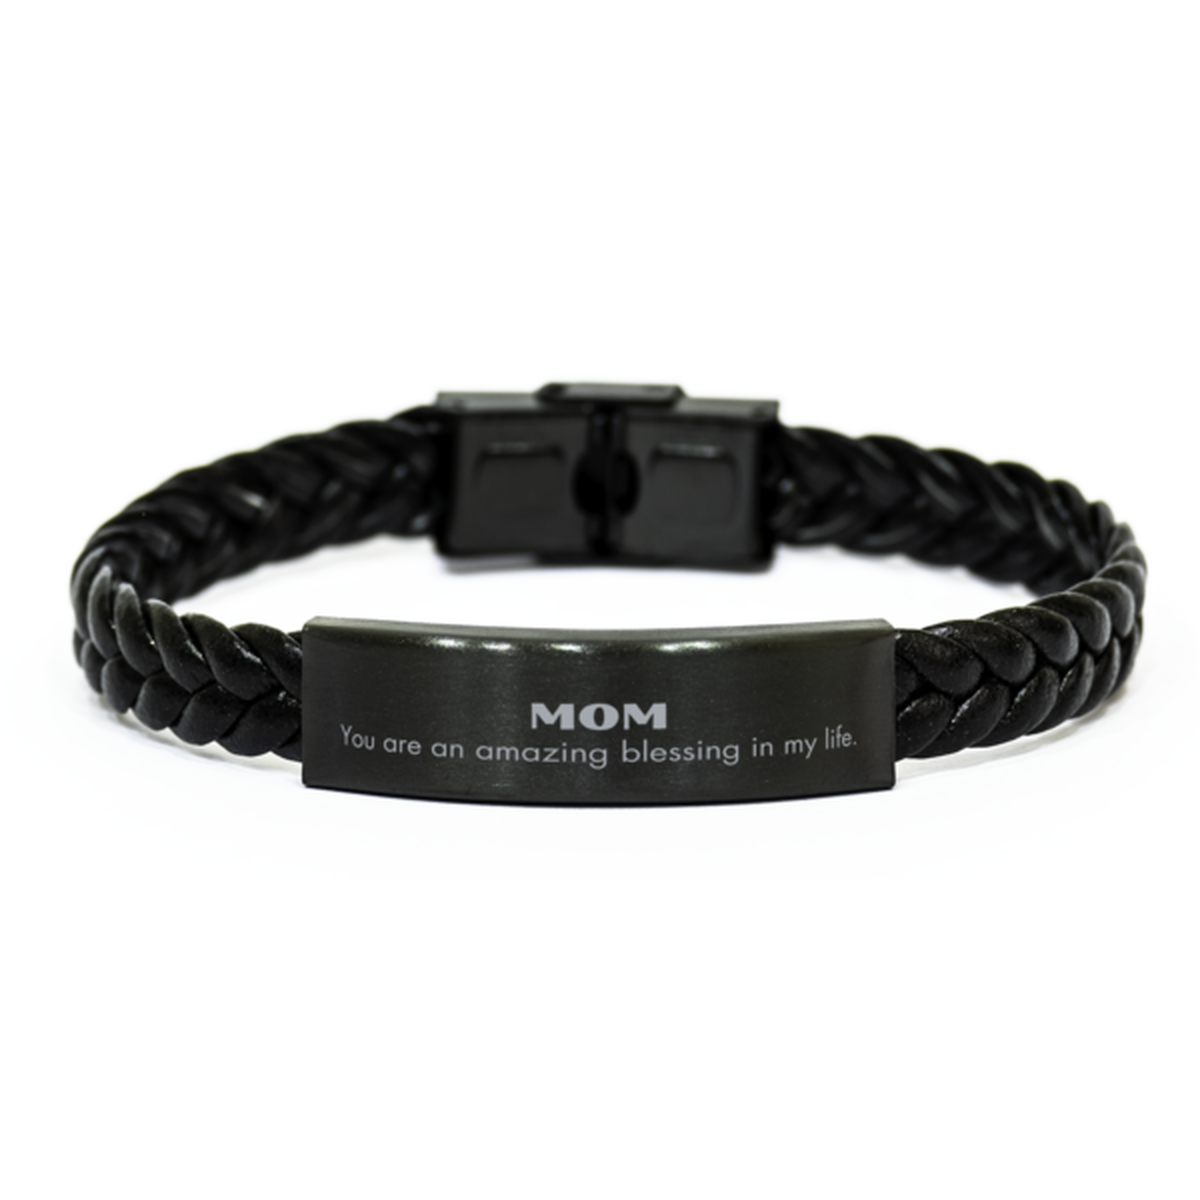 Mom Braided Leather Bracelet, You are an amazing blessing in my life, Thank You Gifts For Mom, Inspirational Birthday Christmas Unique Gifts For Mom